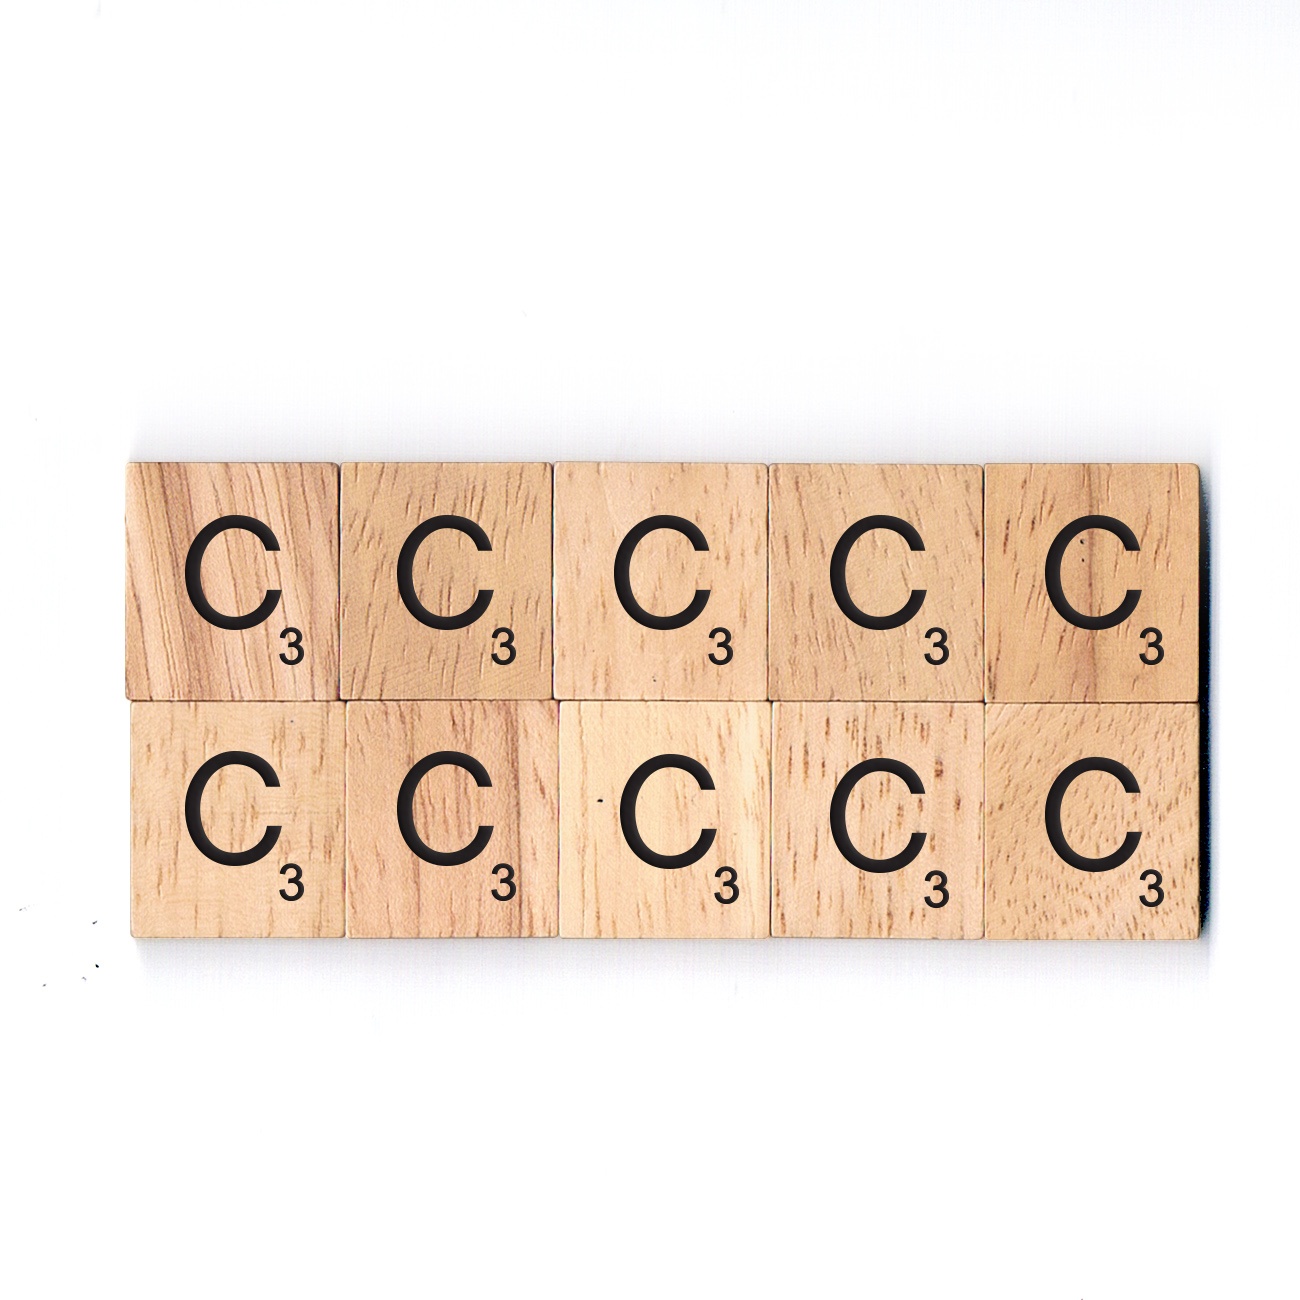 10 Scrabble Letter C Replacement Tiles of for Crafts 